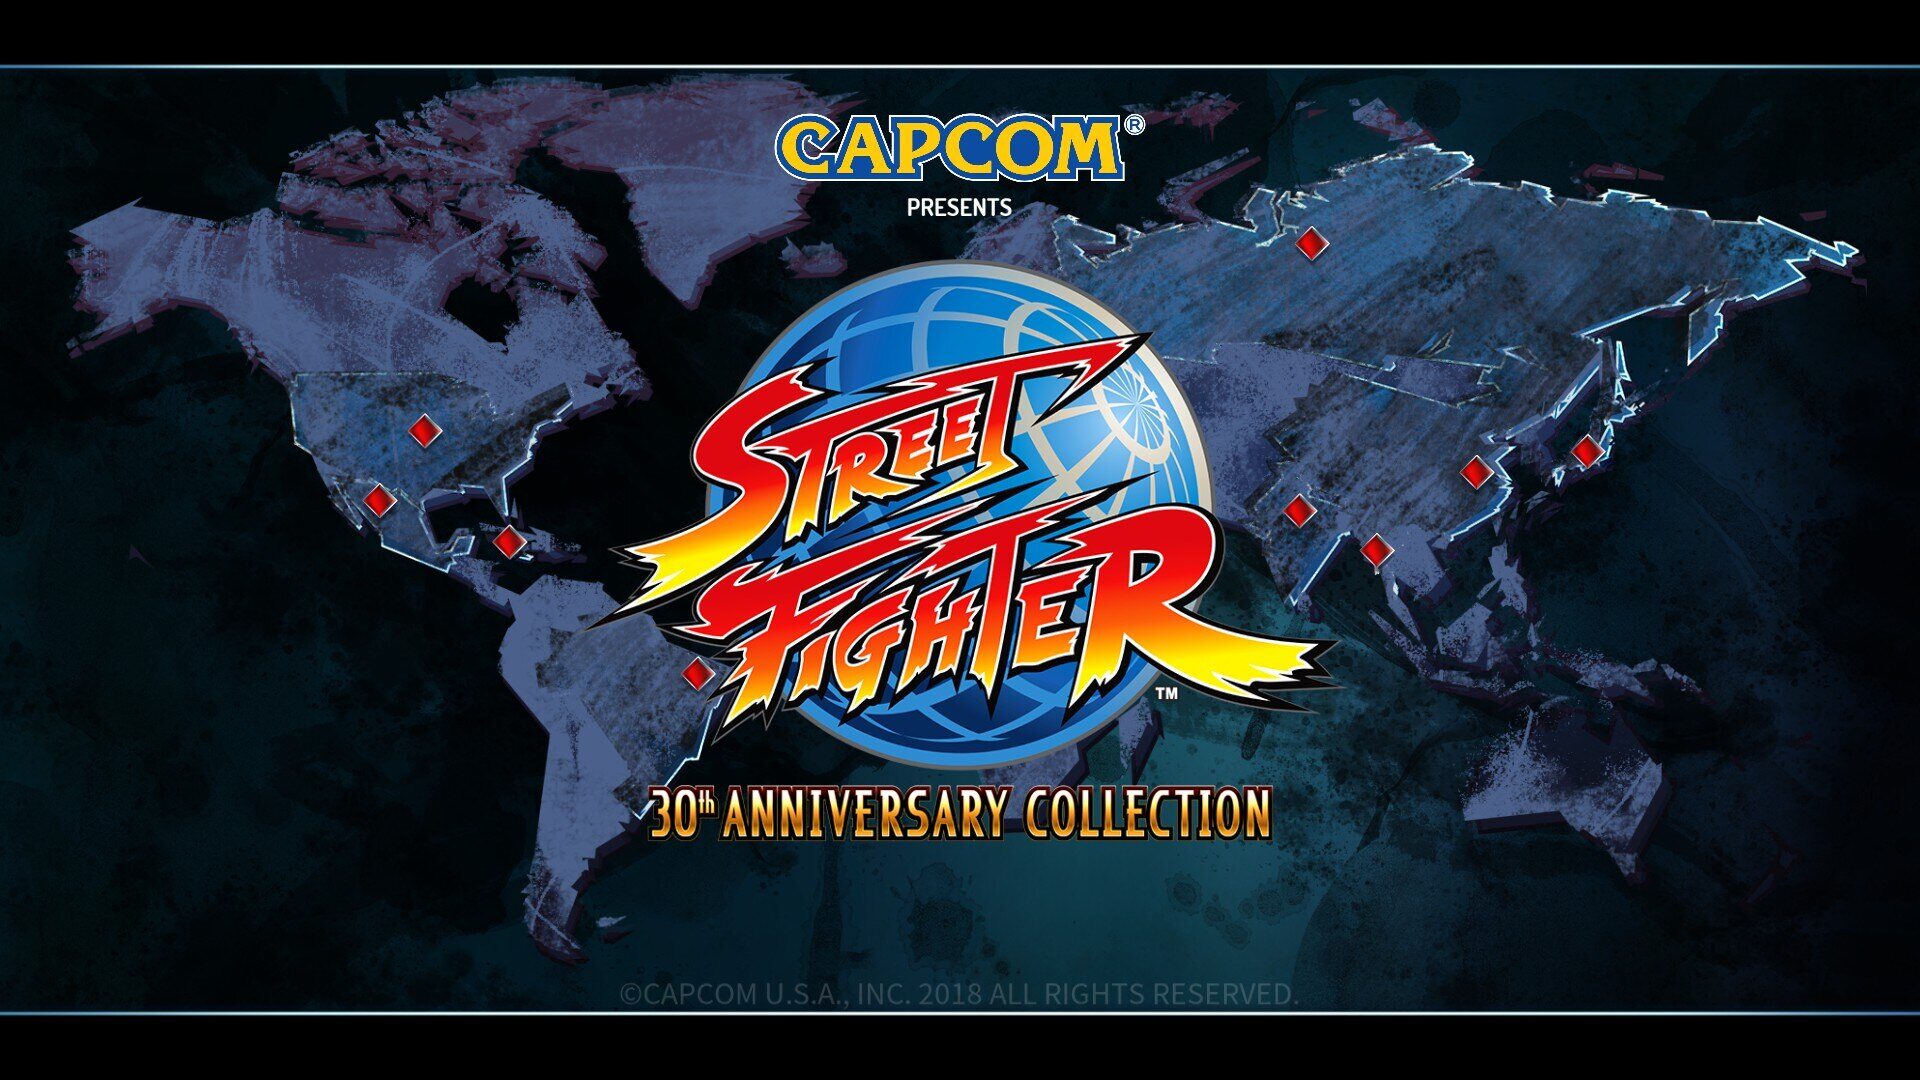 Capcom Fighting Collection cheats and codes: Character unlocks, more